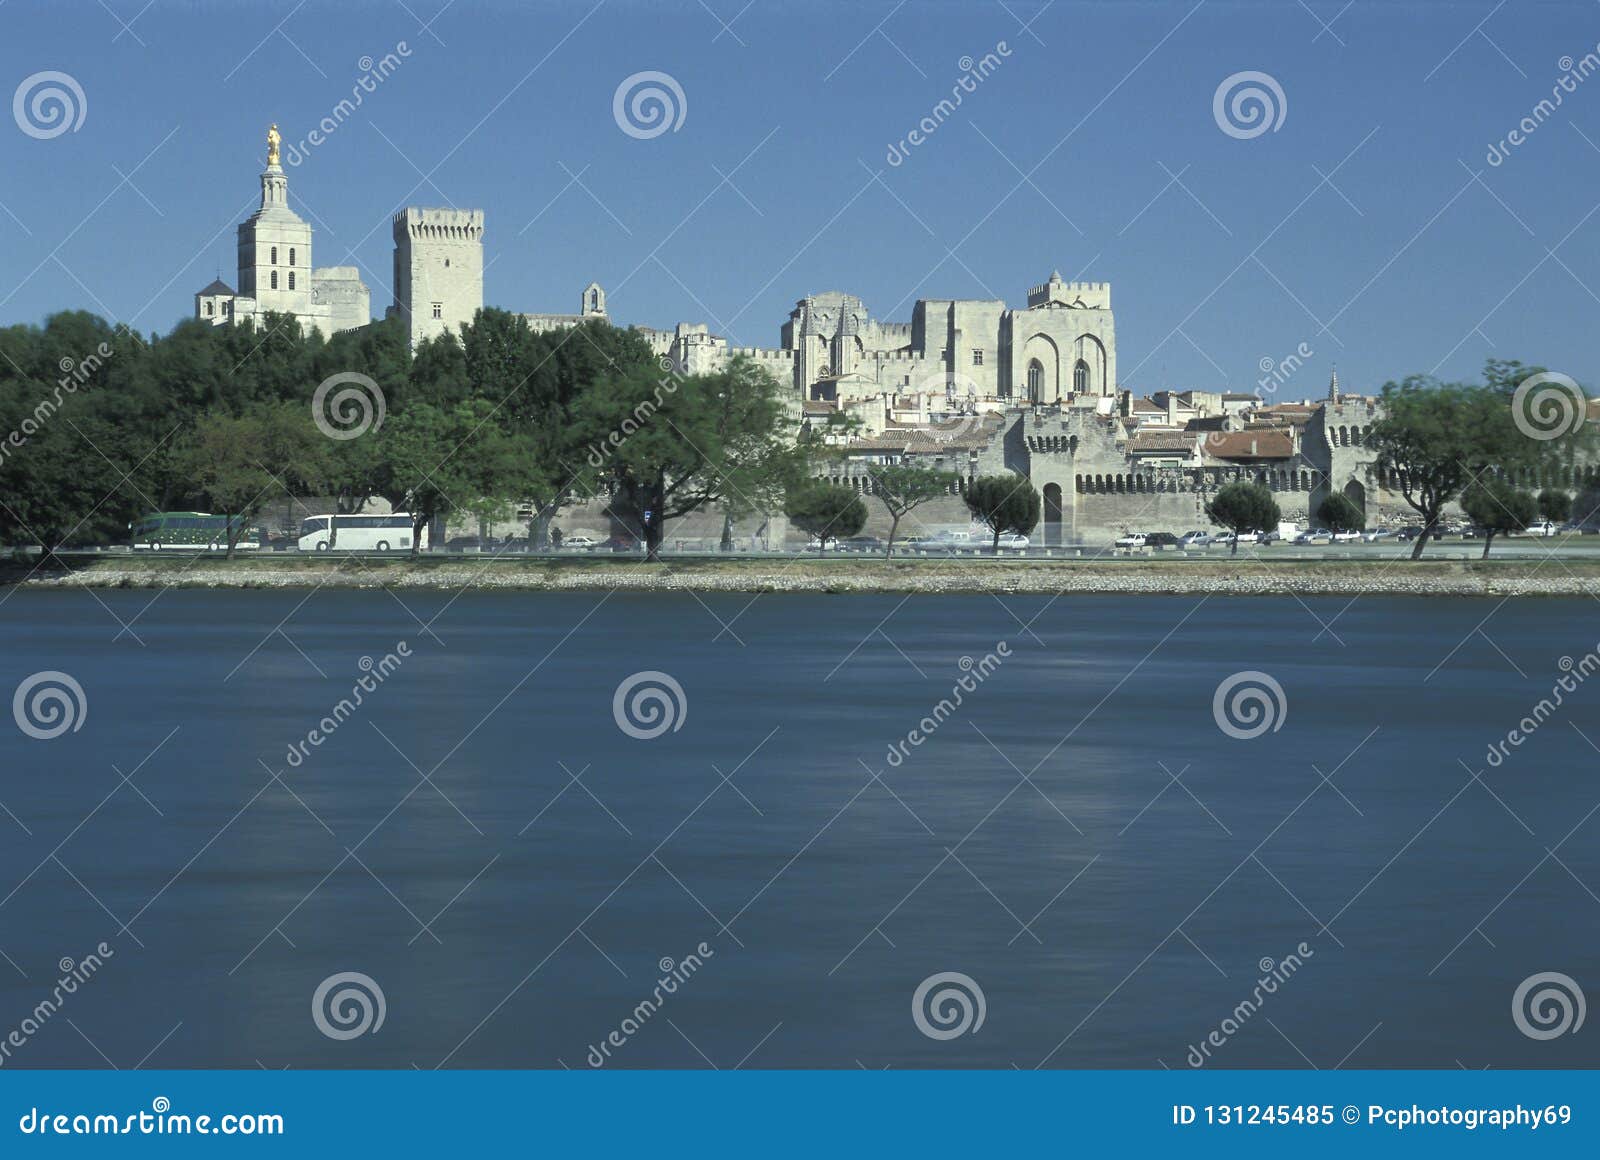 river rhone and popes` palace, avignon, france